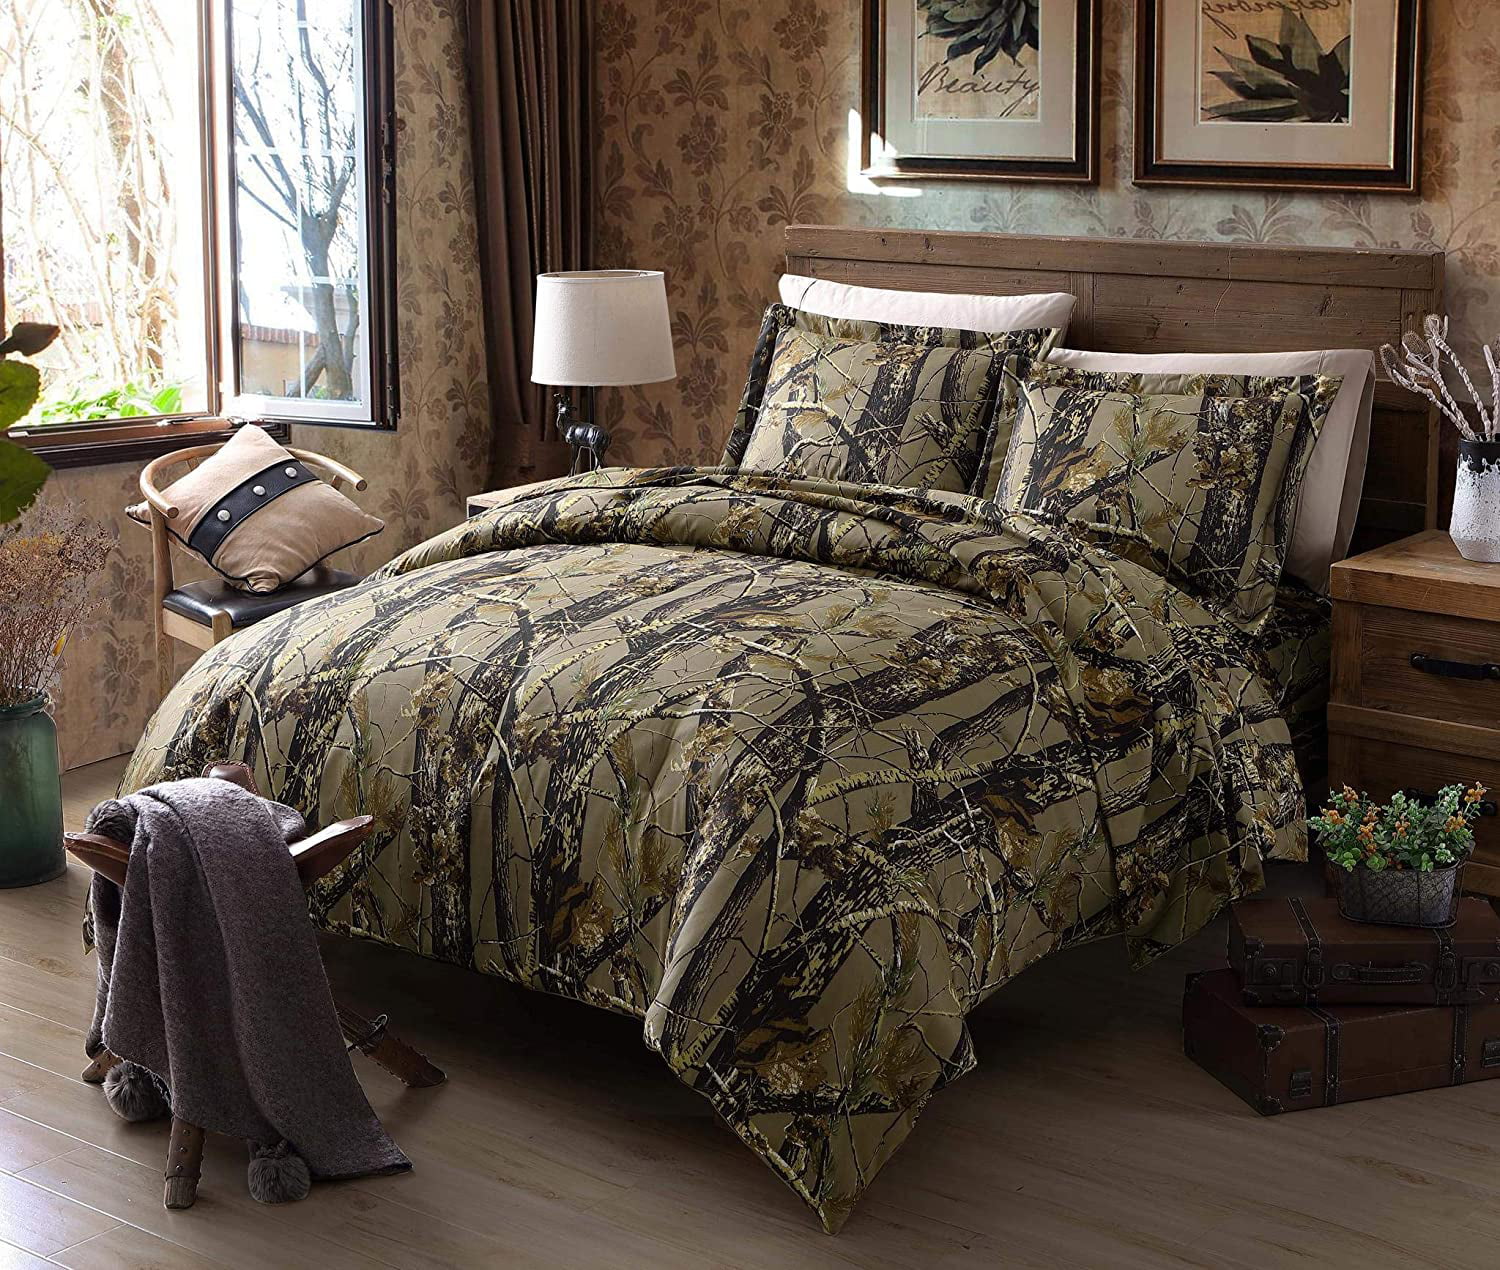 MOSSY OAK BREAK UP COUNTRY CAMO BEDDING SET TWIN SIZE HOME BED PILLOW ~ 2 PIECE 